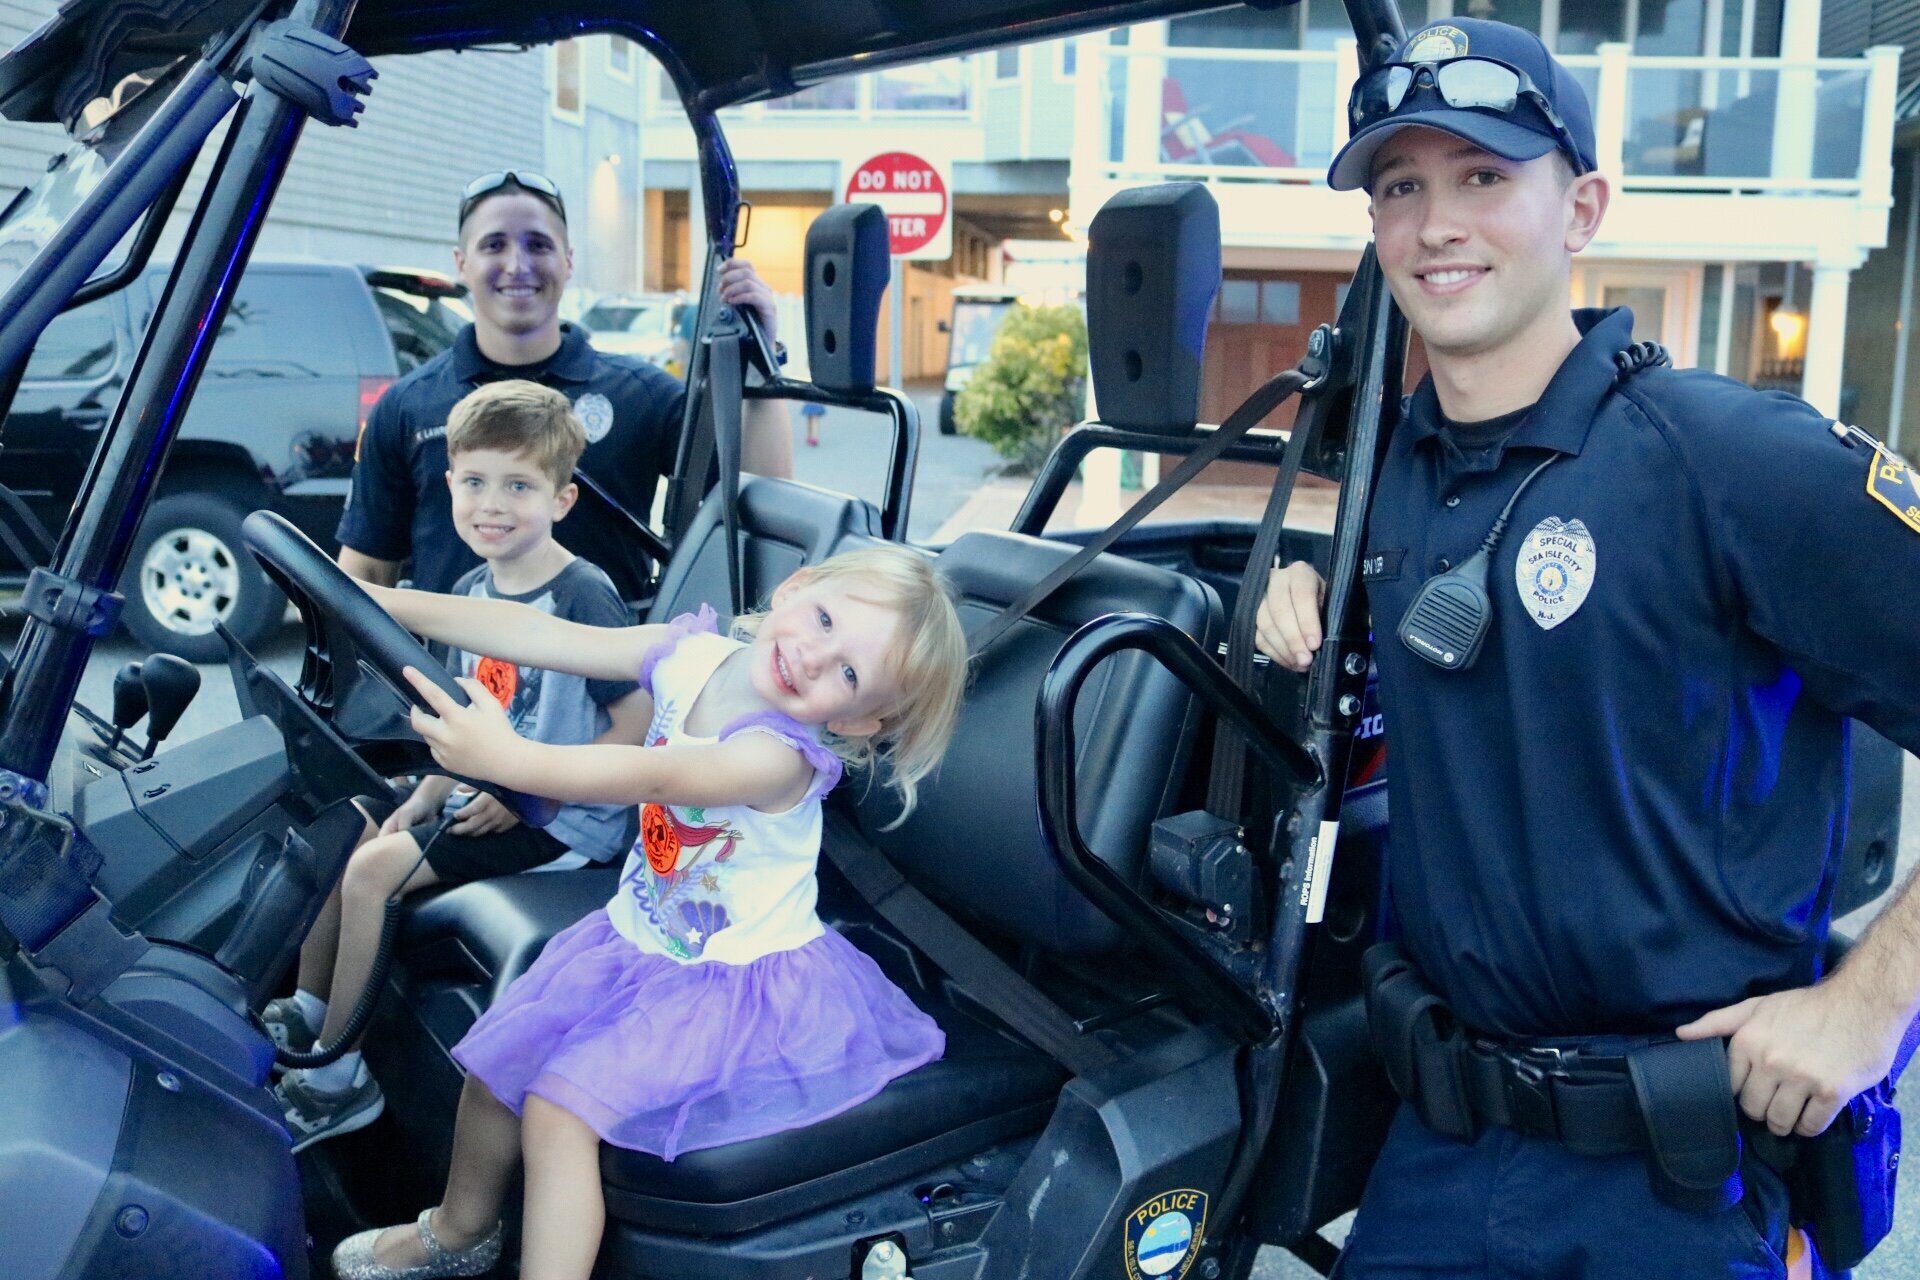 Bryce Keppler and Ella VanderNeut with Officers Kyle Lawrence and Jeffrey Snyder at National Night Out.